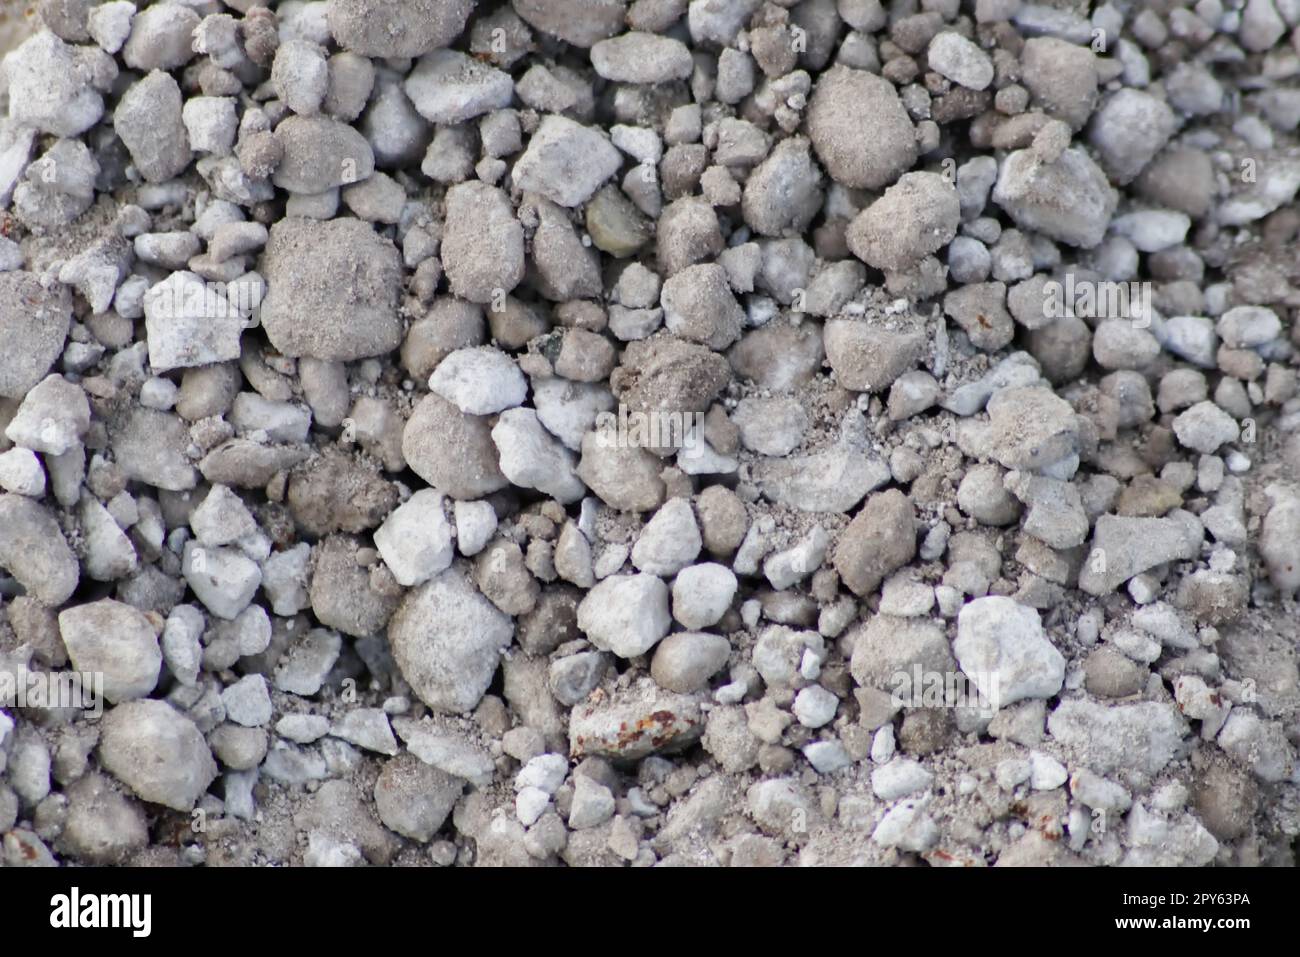 Gray raw rocks and rough stones as natural stones background with crushed and rough material as building material or rocky base for concrete mixture in gray colors as natural stones background Stock Photo